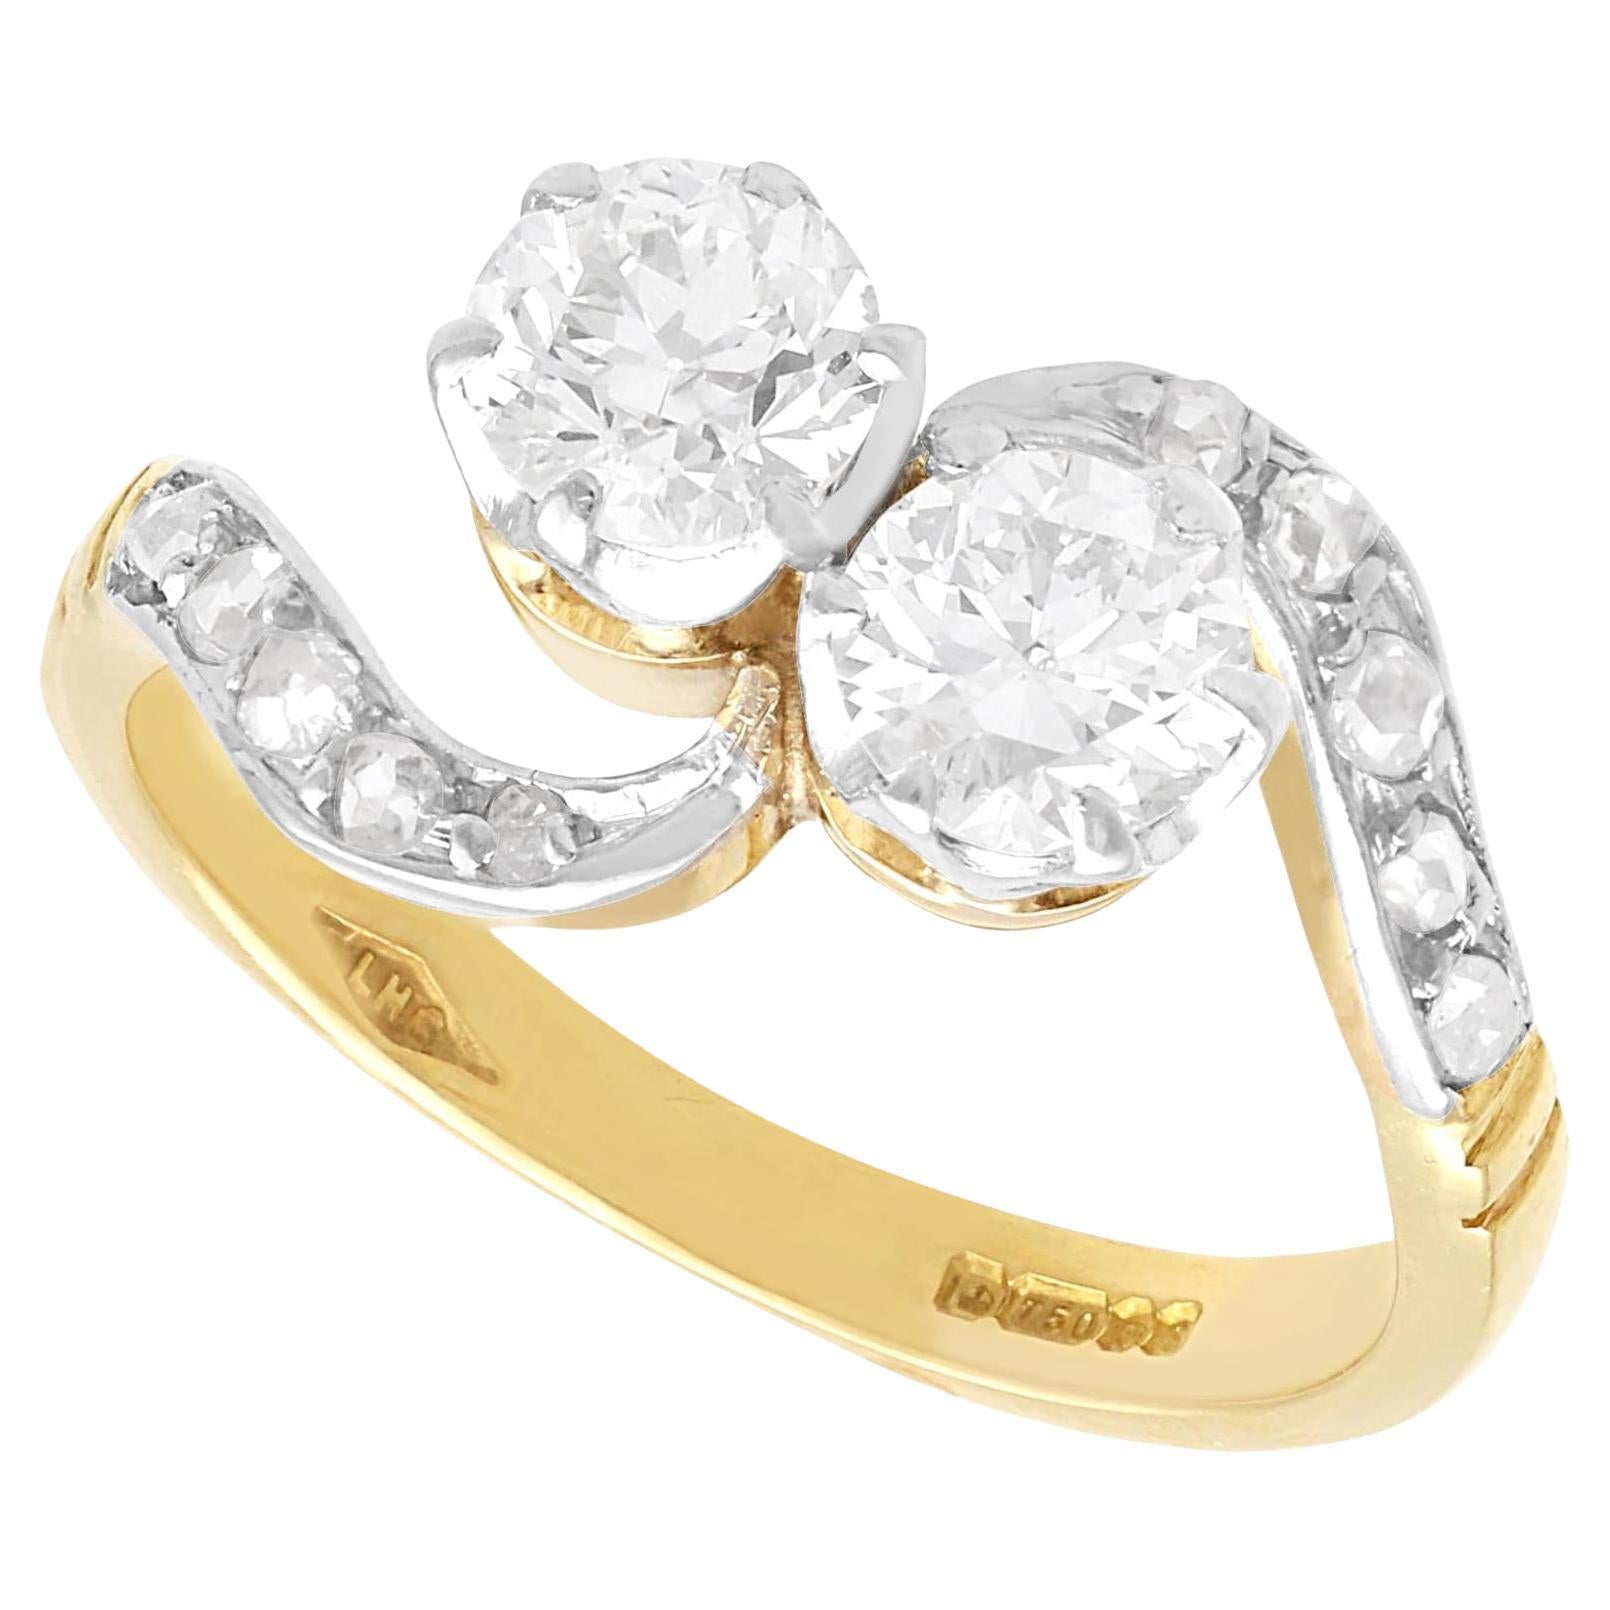 Antique and Vintage 1.22 Carat Diamond and 18 Karat Yellow Gold Twist Ring For Sale